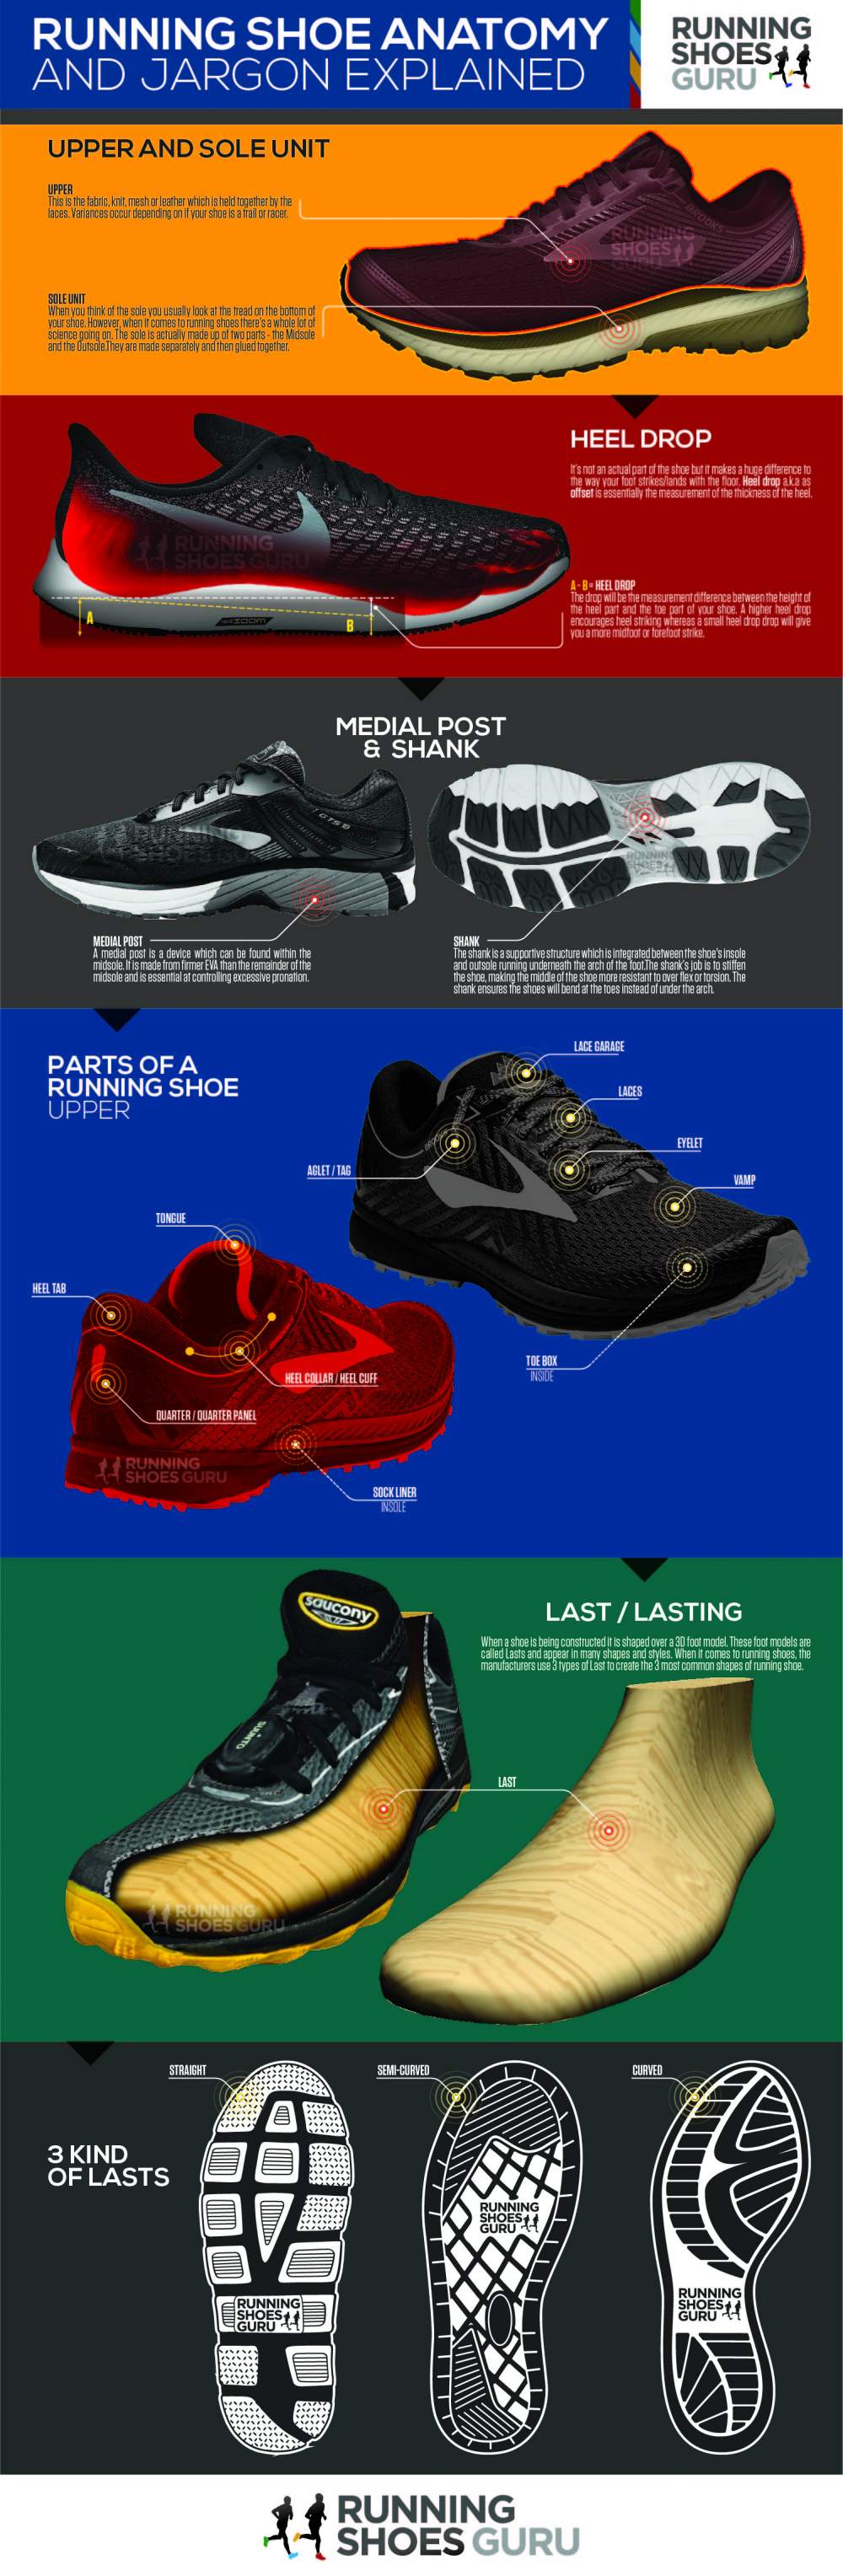 Anatomy of a Running Shoe - Infographic Portal